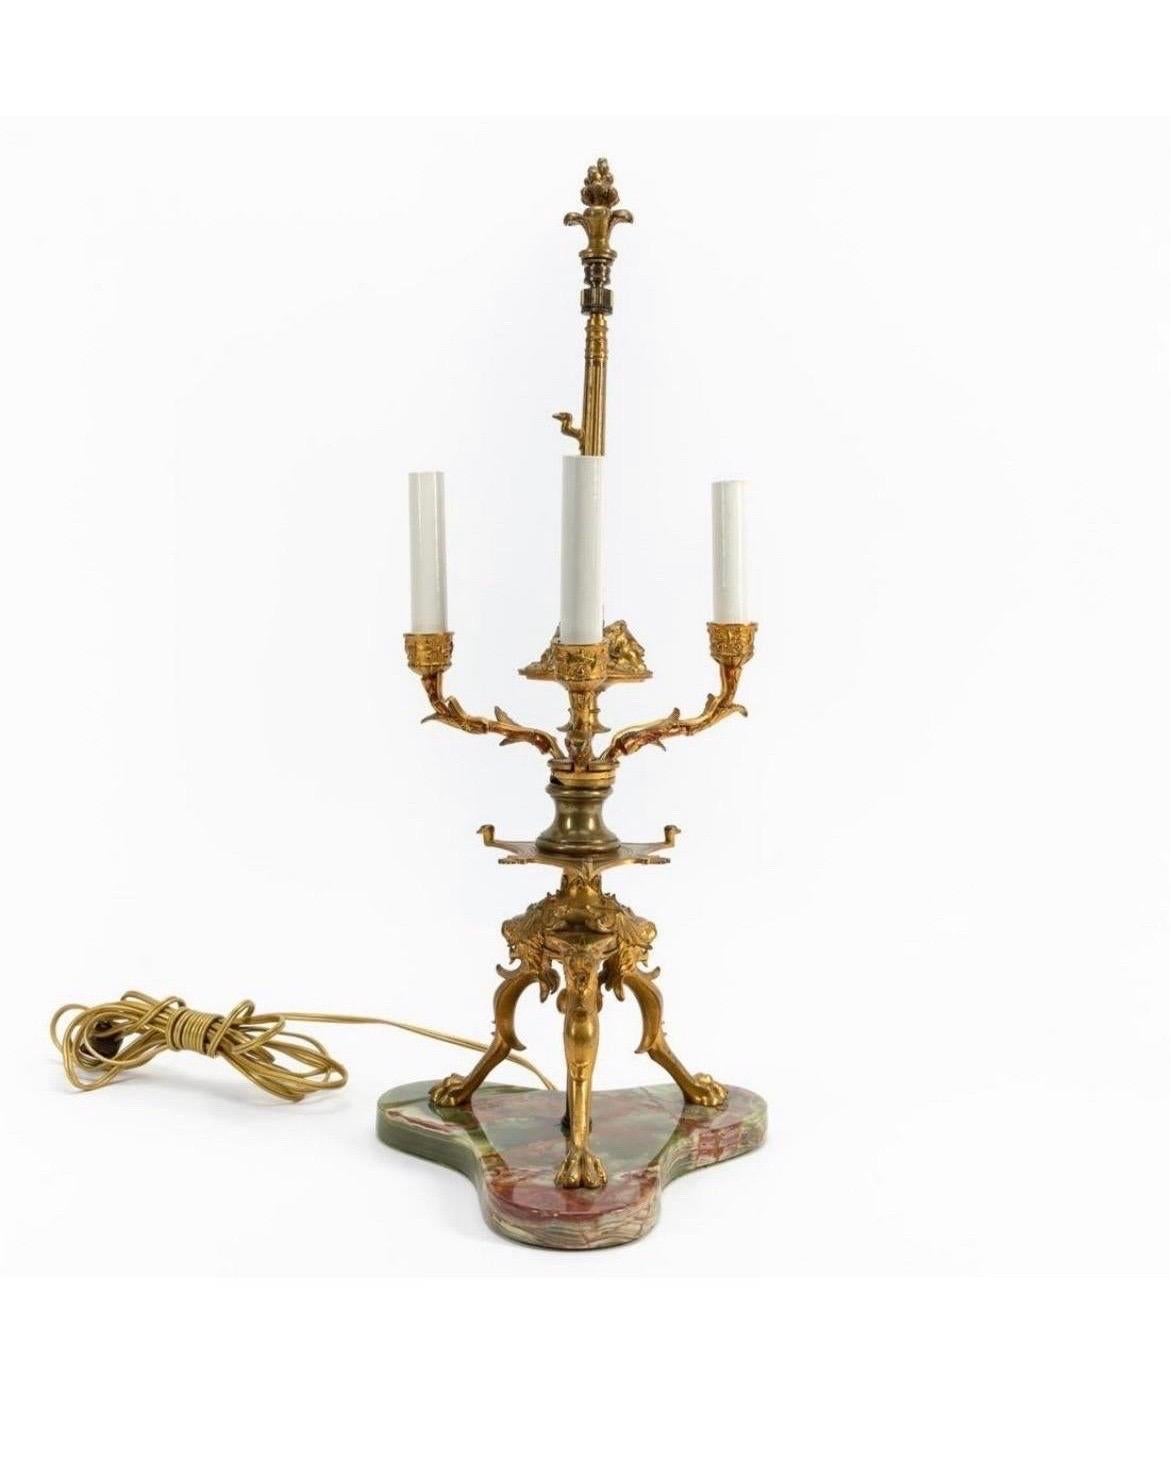 French, 19th century, cast gilt bronze three-light bouillotte lamp, now electrified, having a black paper shade, and rising on paw feet, mounted on a green onyx base. Unmarked. Measures: Approx. overall, height. 24